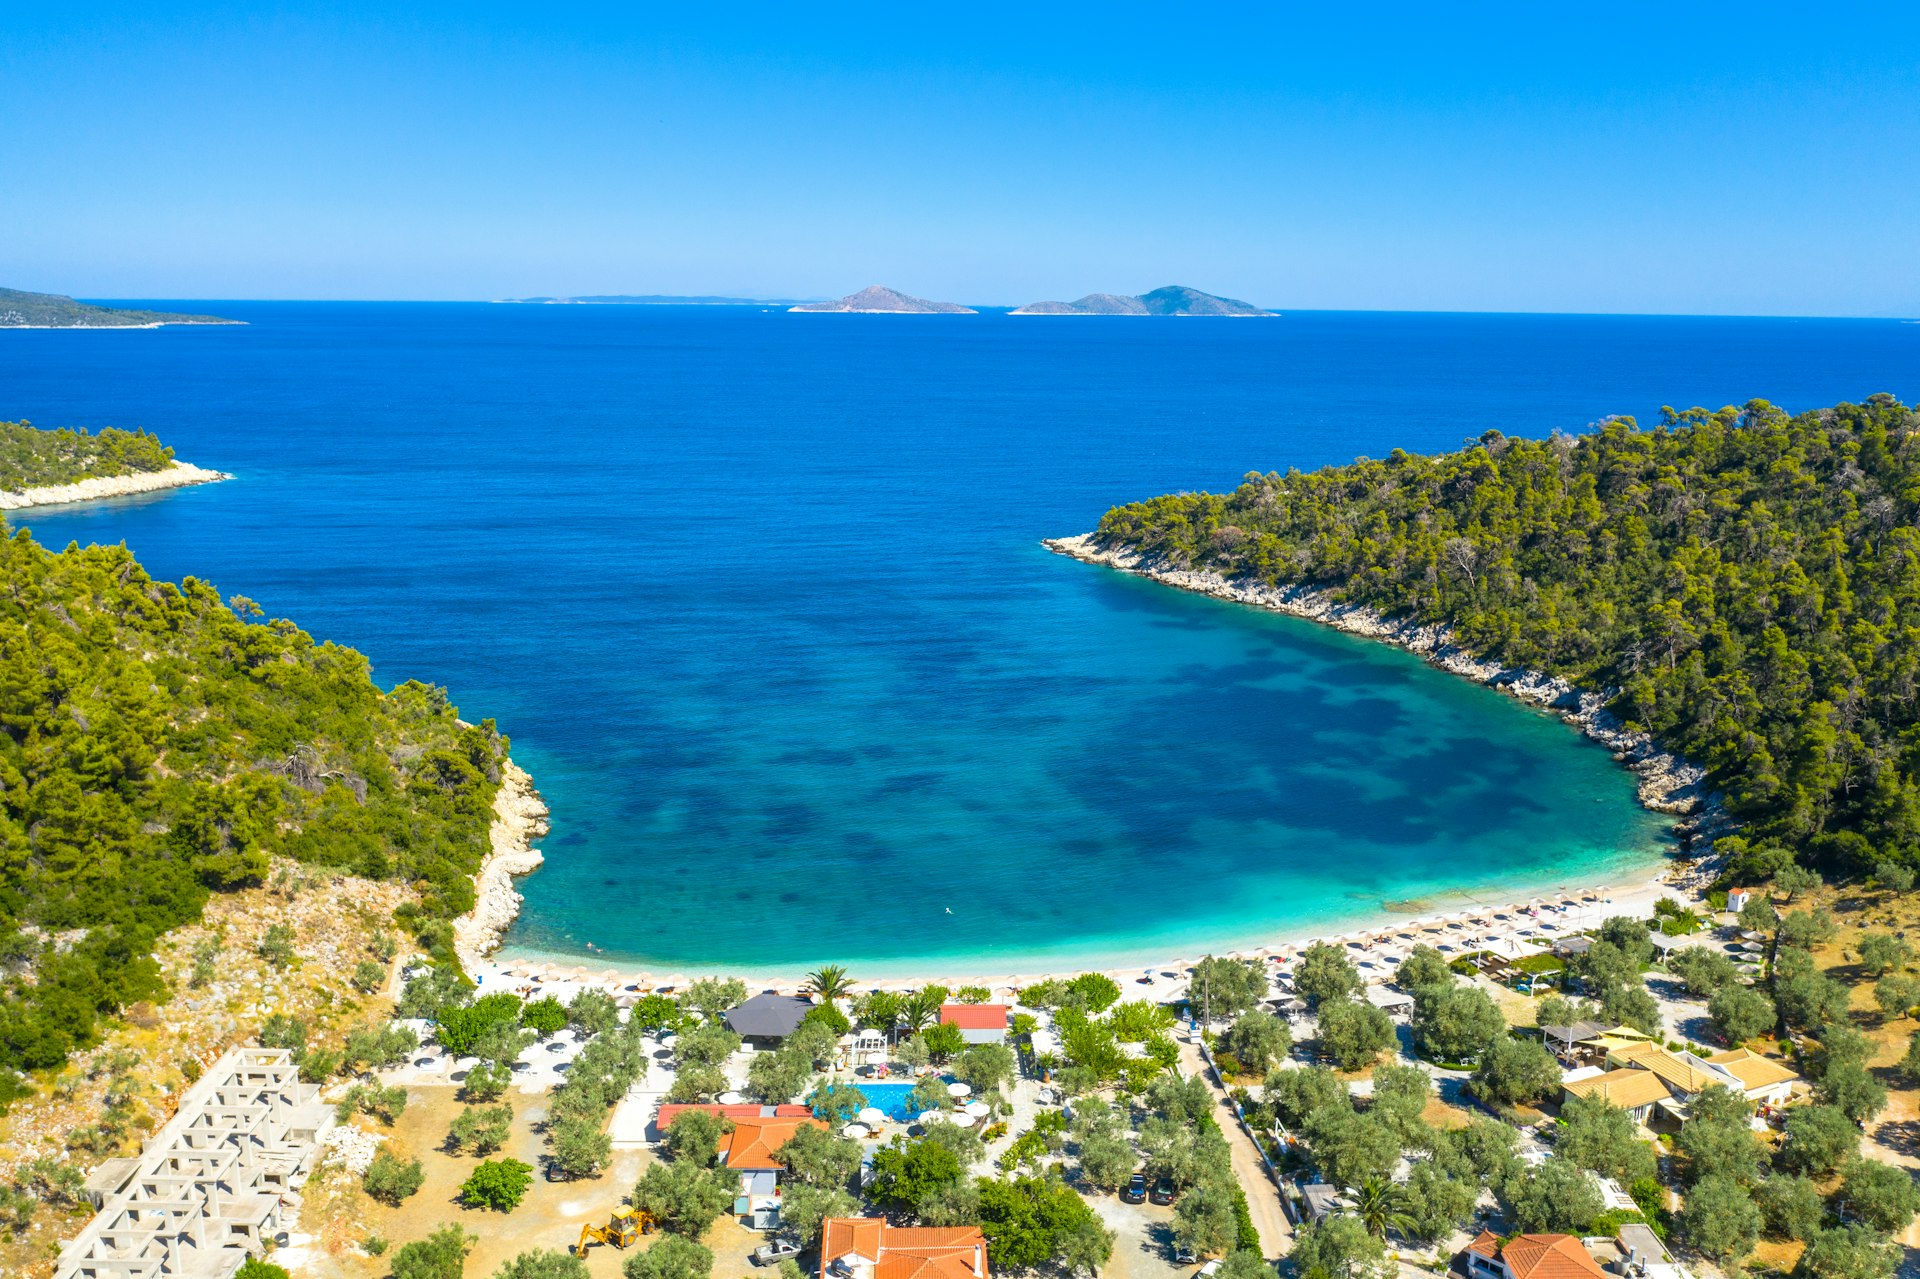 An aerial view of a white strip of sand and blue waters off the coast of Alonnisos Island, Greece. The beach is backed by a small village, with numerous buildings.